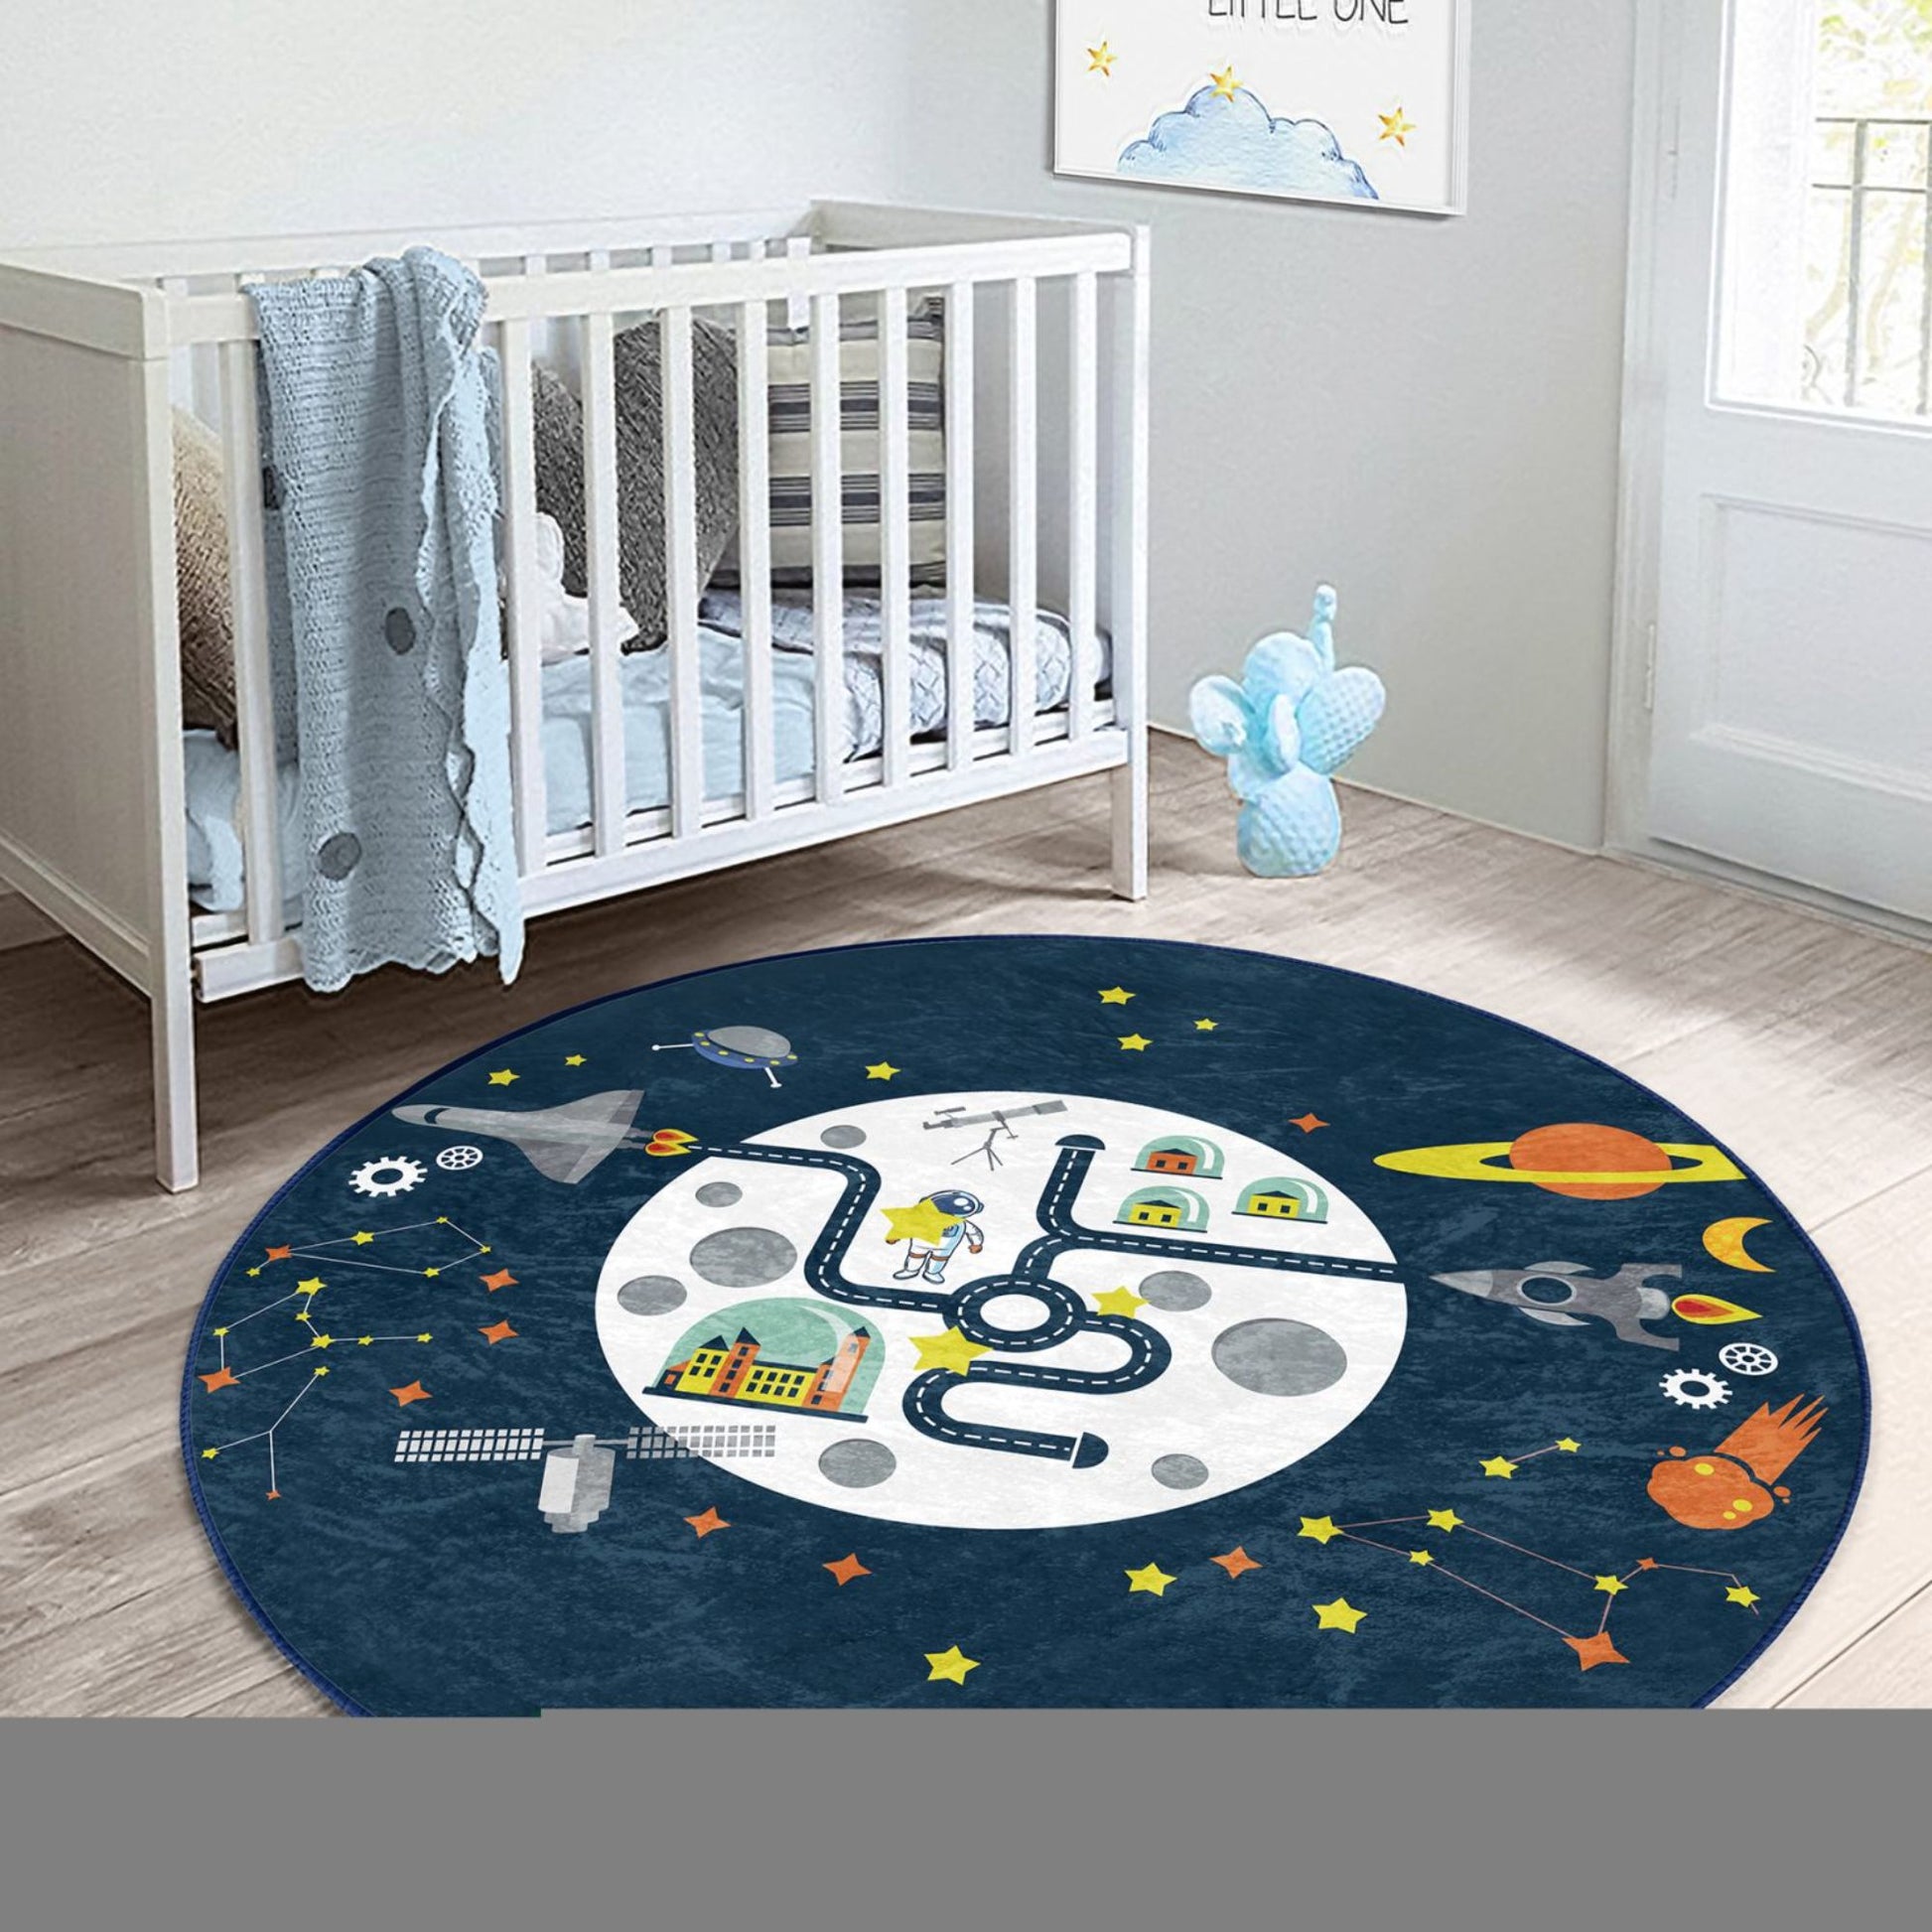 Rug with Space Center Design for Kids' Play Area